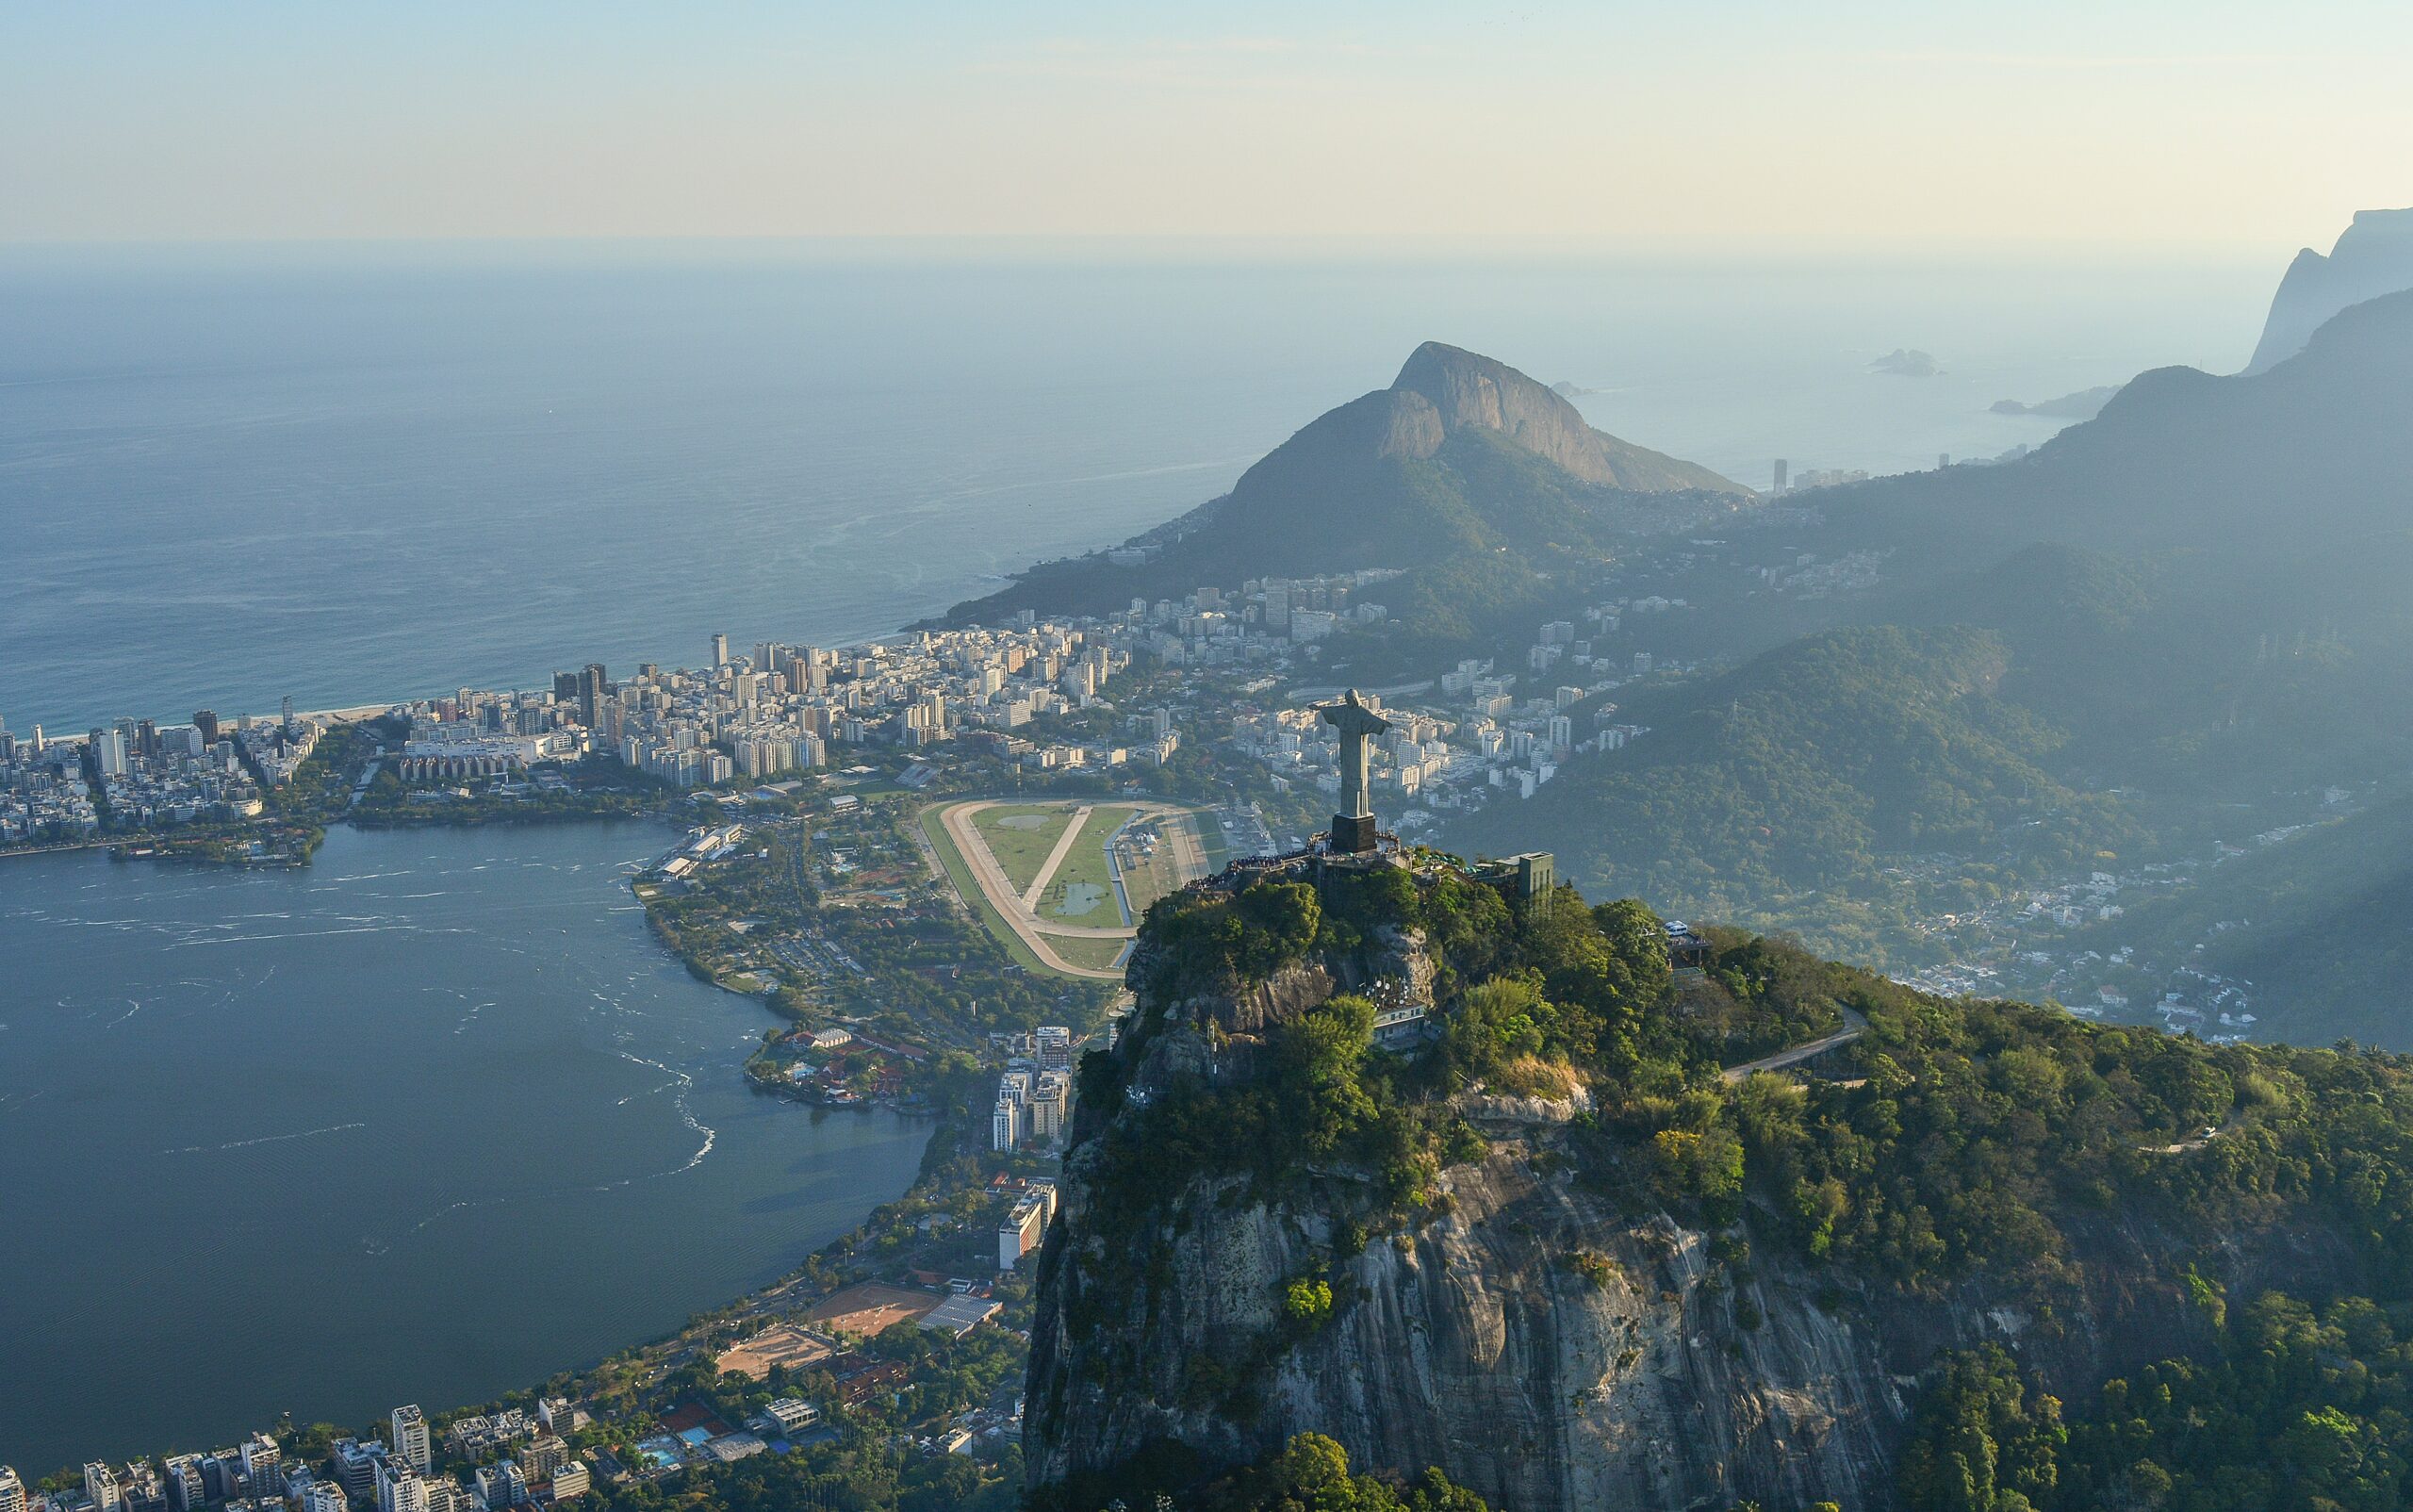 Rio de Janeiro is a safe city with many enticing areas for tourists to stay in.
pictured: the Christ the Redeemer statue on Mount Corcovado 